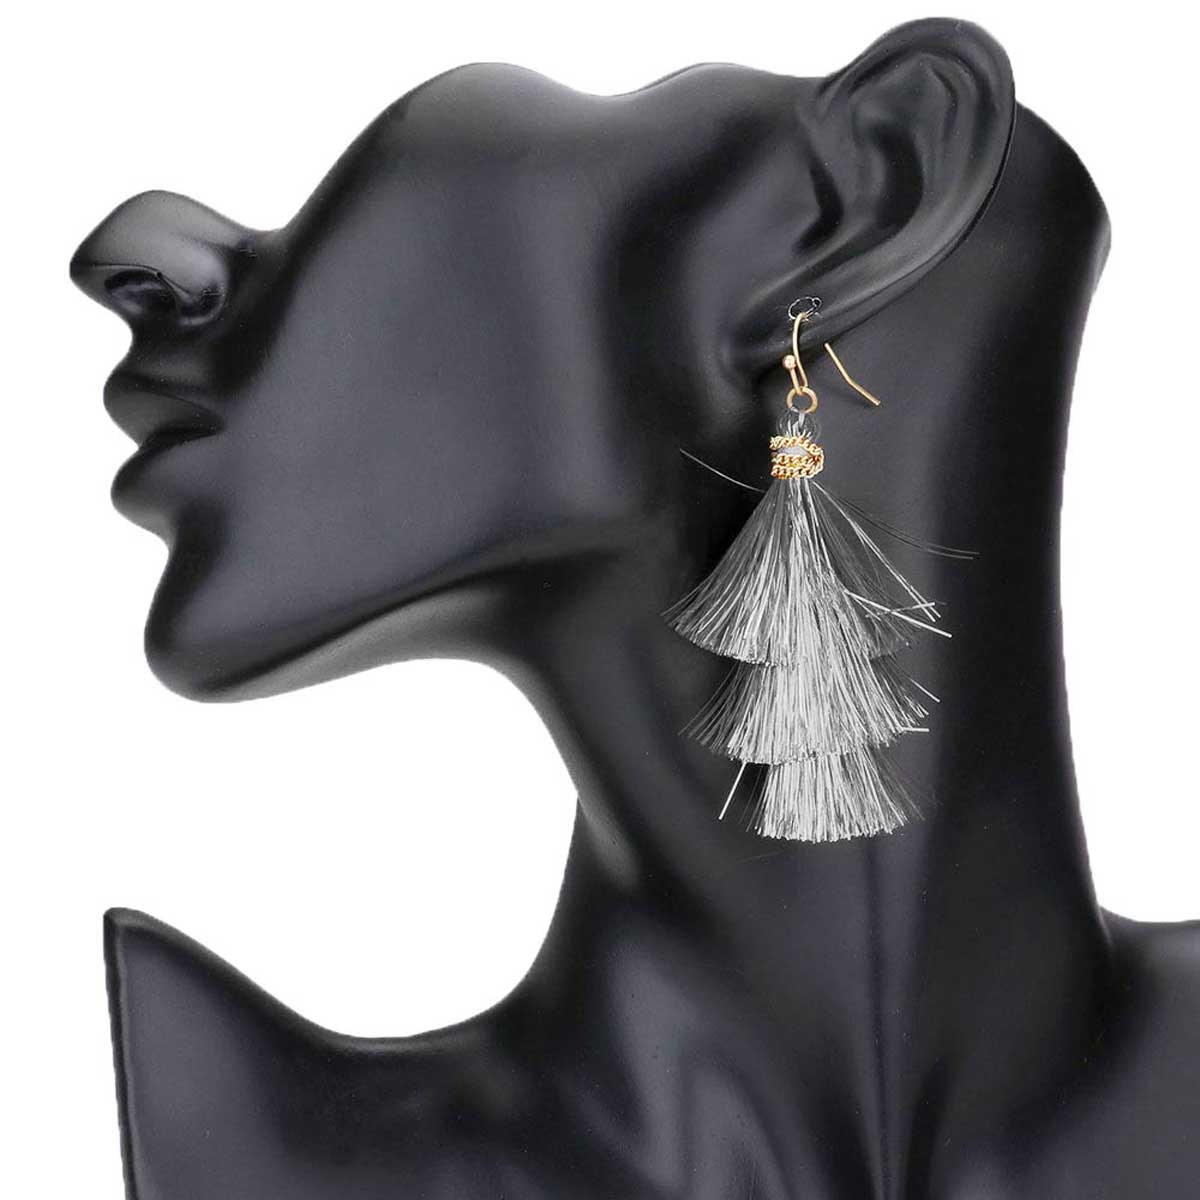 Silver Christmas Fringe Dangle Earrings. Are you looking for some cute and fun earrings for Christmas! These cute Christmas earrings will decorate your Christmas costumes or outfits . They will make them more exciting and eye-catching! Christmas dangle earrings can be used in Christmas, New Year parties and other joyous occasions. Awesome gift idea to give someone who loves the magic of Christmas.